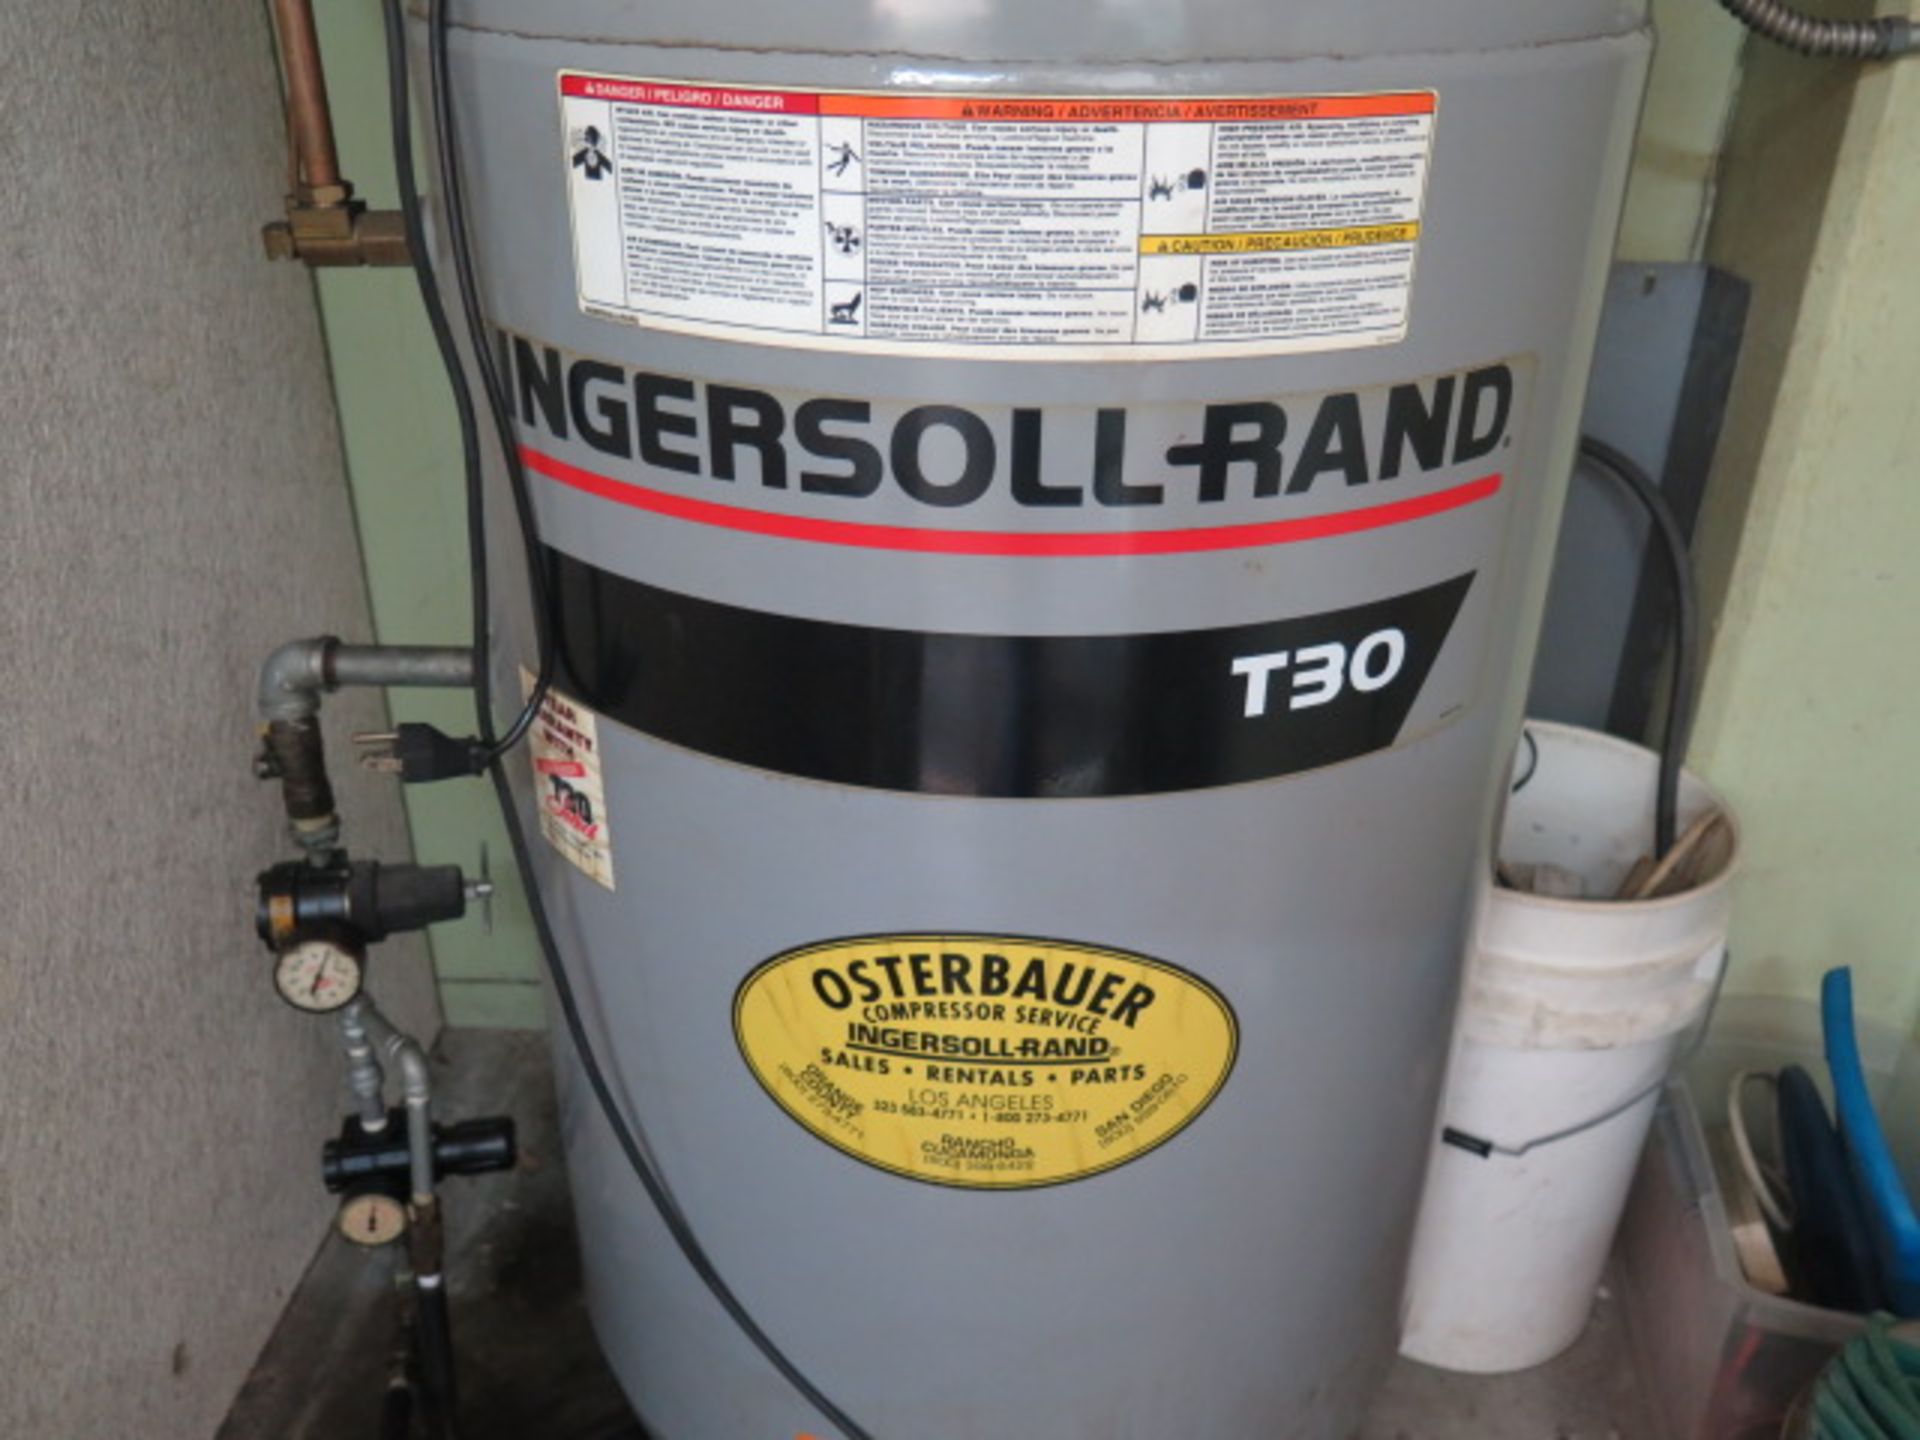 Ingersoll Rand T30 7.5Hp Vertical Air Compressor w/ 80 Gallon Tank - Image 3 of 4